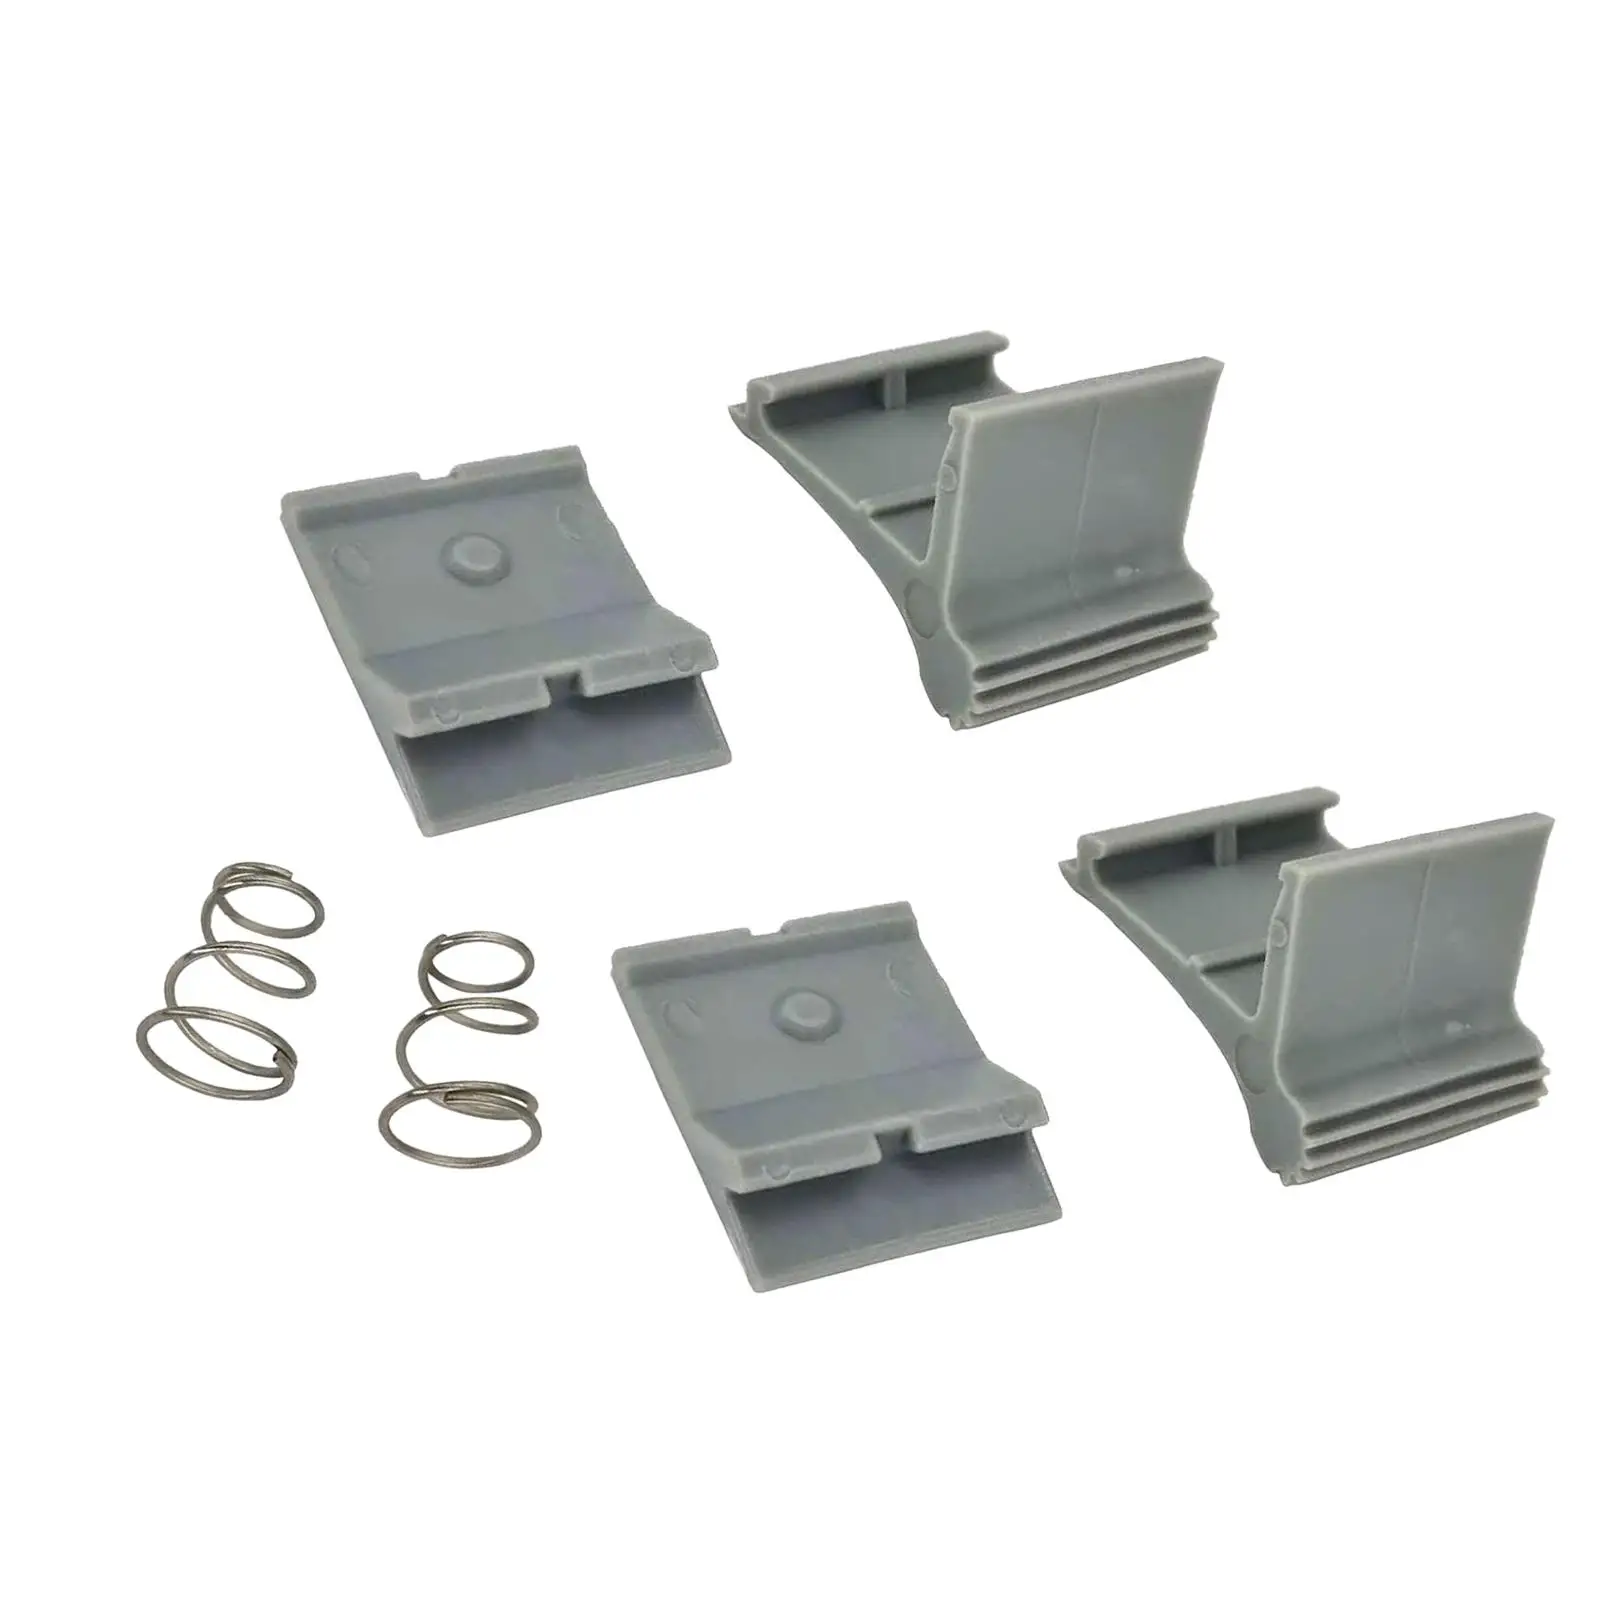 Awning Arm Slider Catch Set Replacement Easy to Install Accessories for Trailer